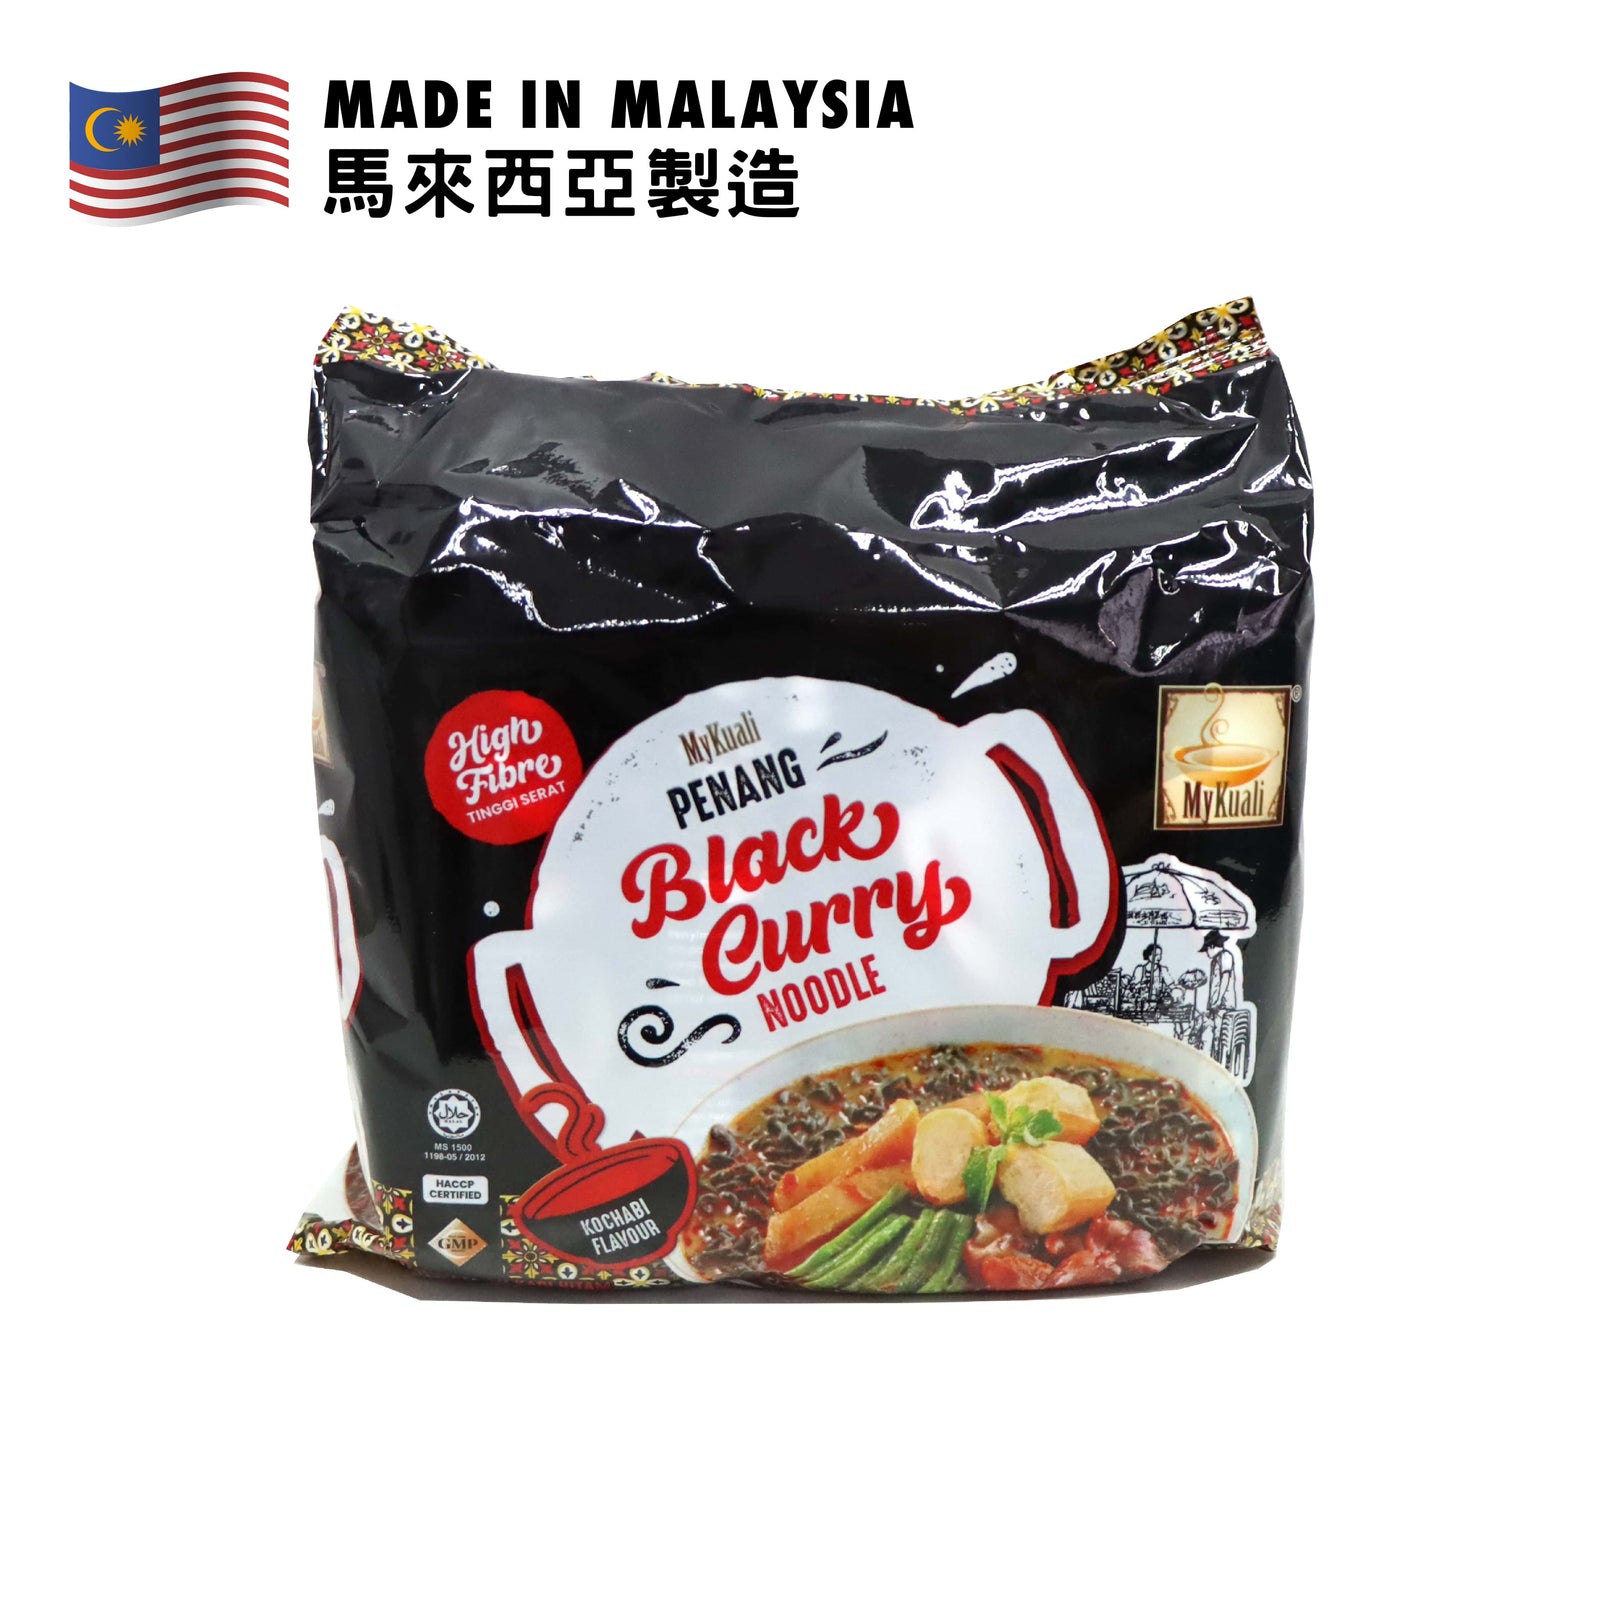 MyKuali Penang Black Curry Noodle 110g x 4